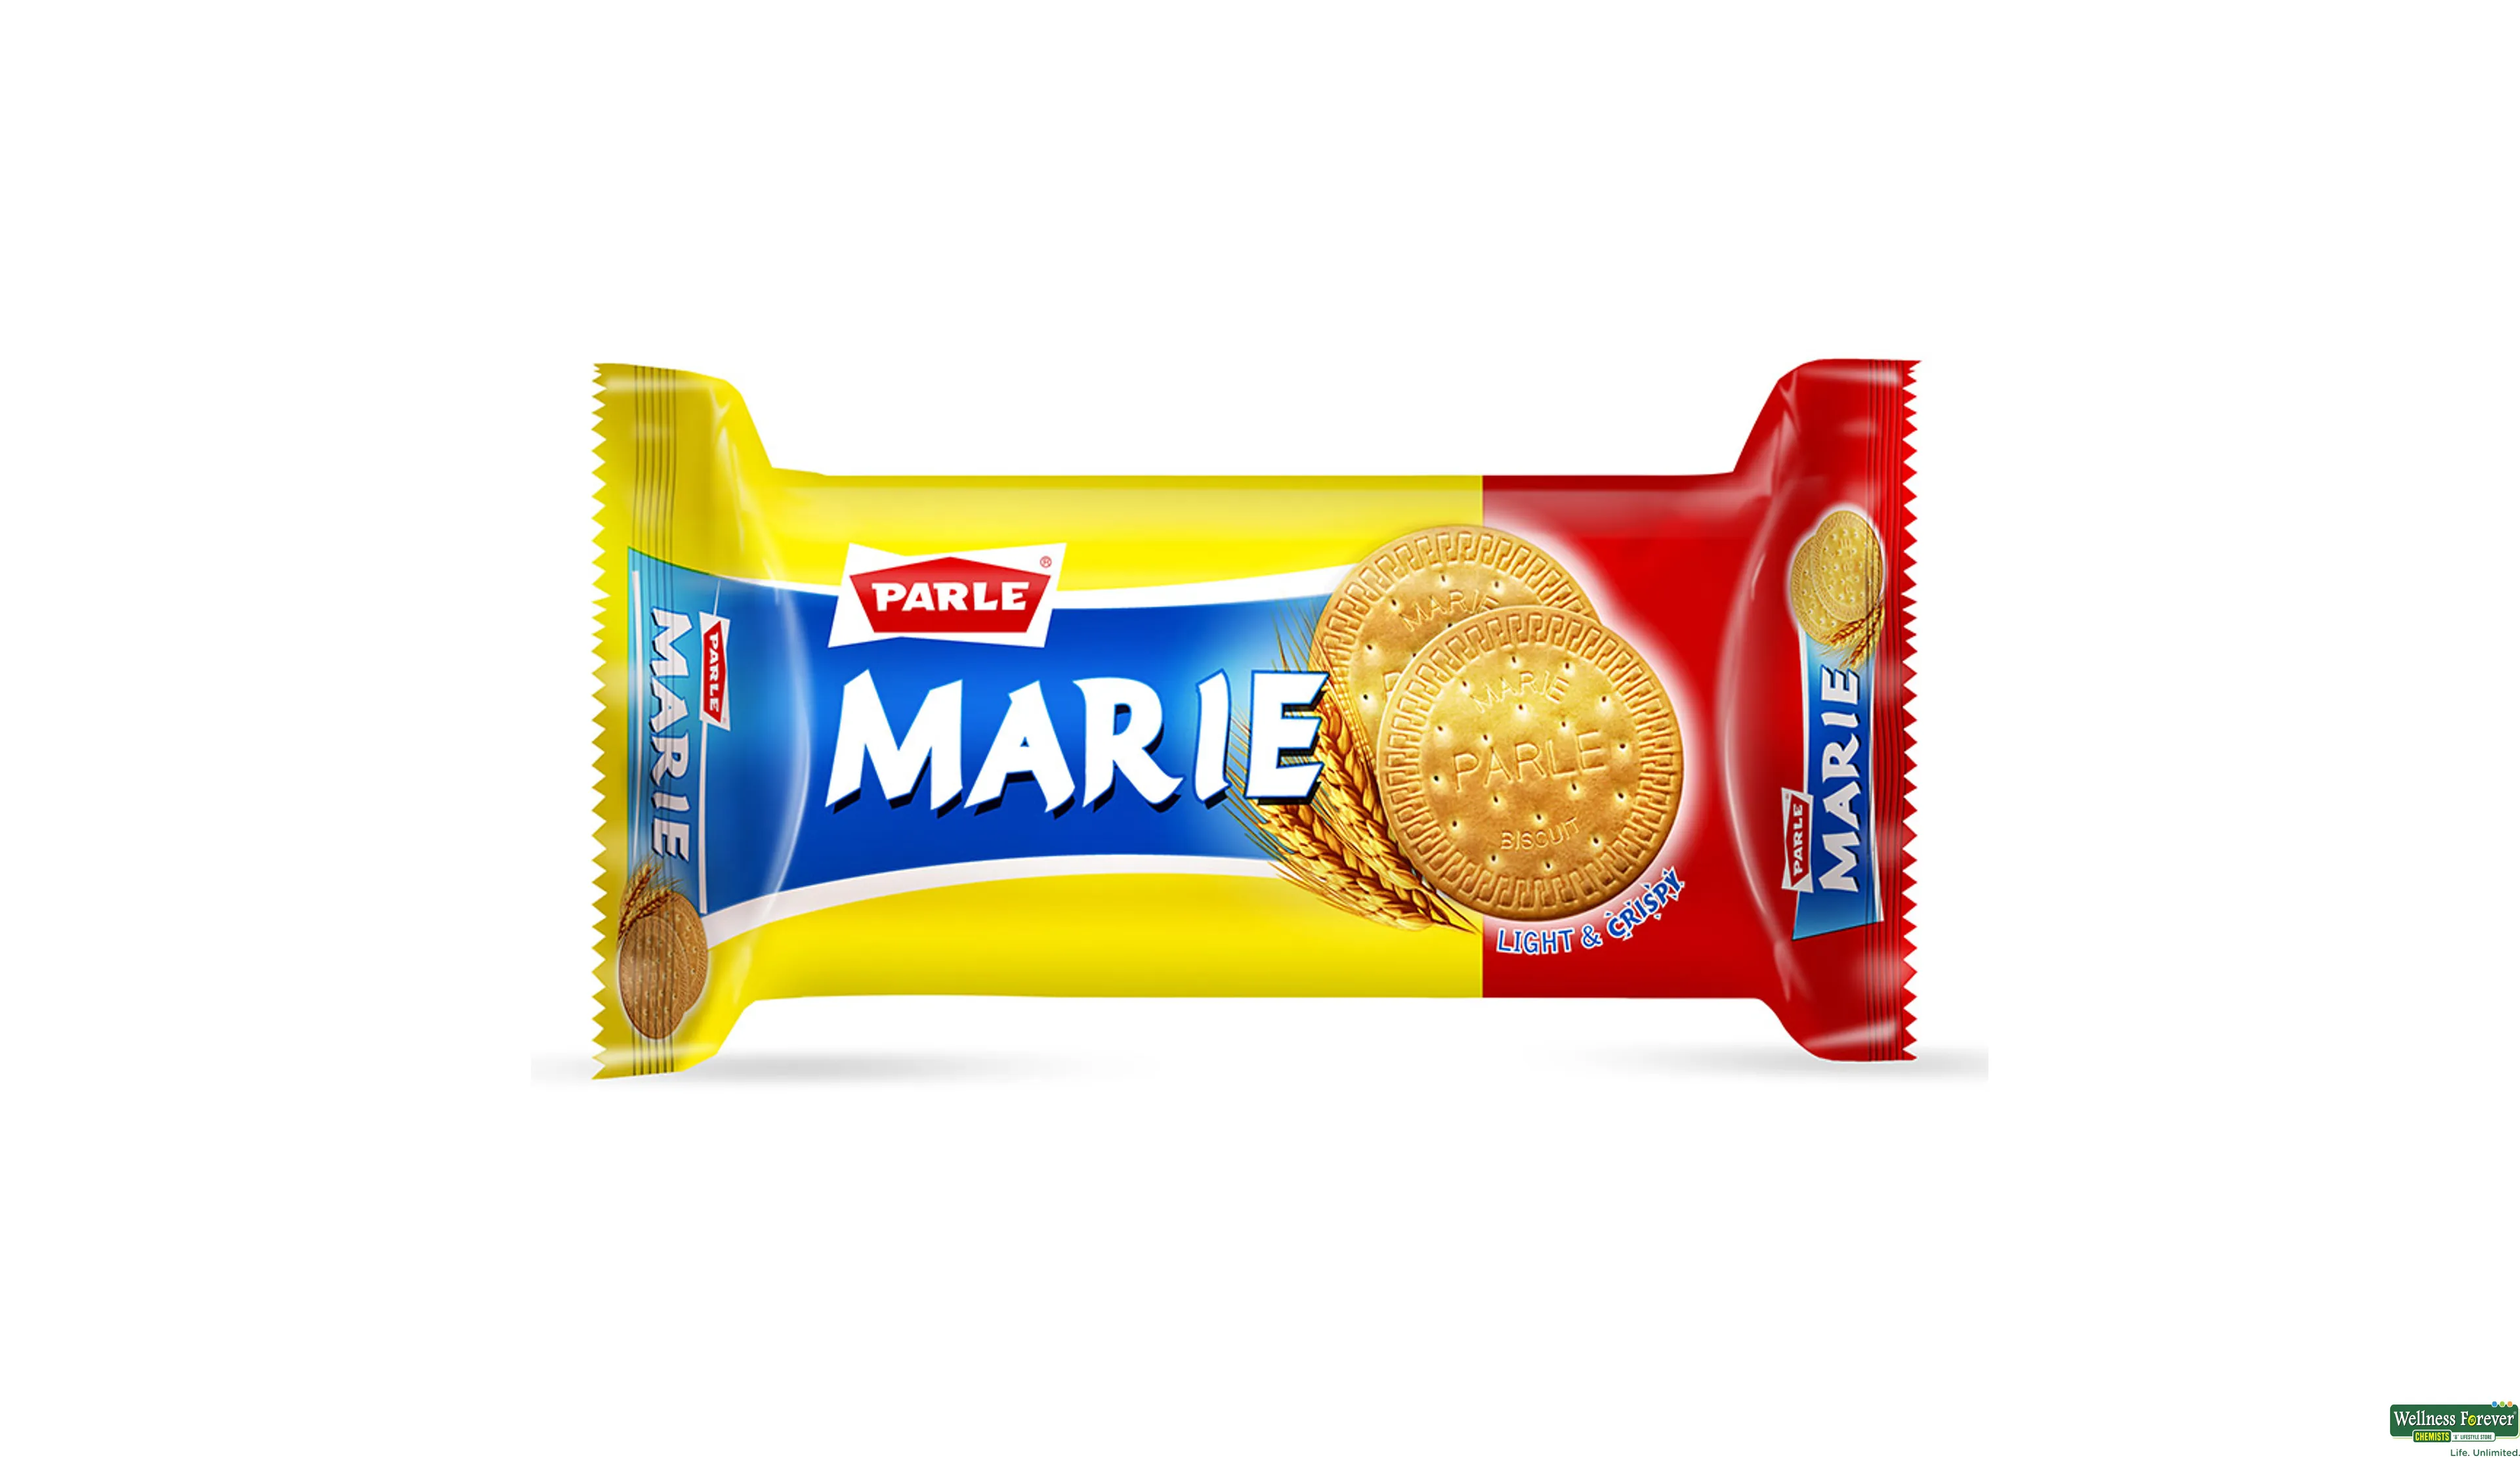 PARLE BISC BAKESMITH MARIE 90GM- 1, 90GM, 